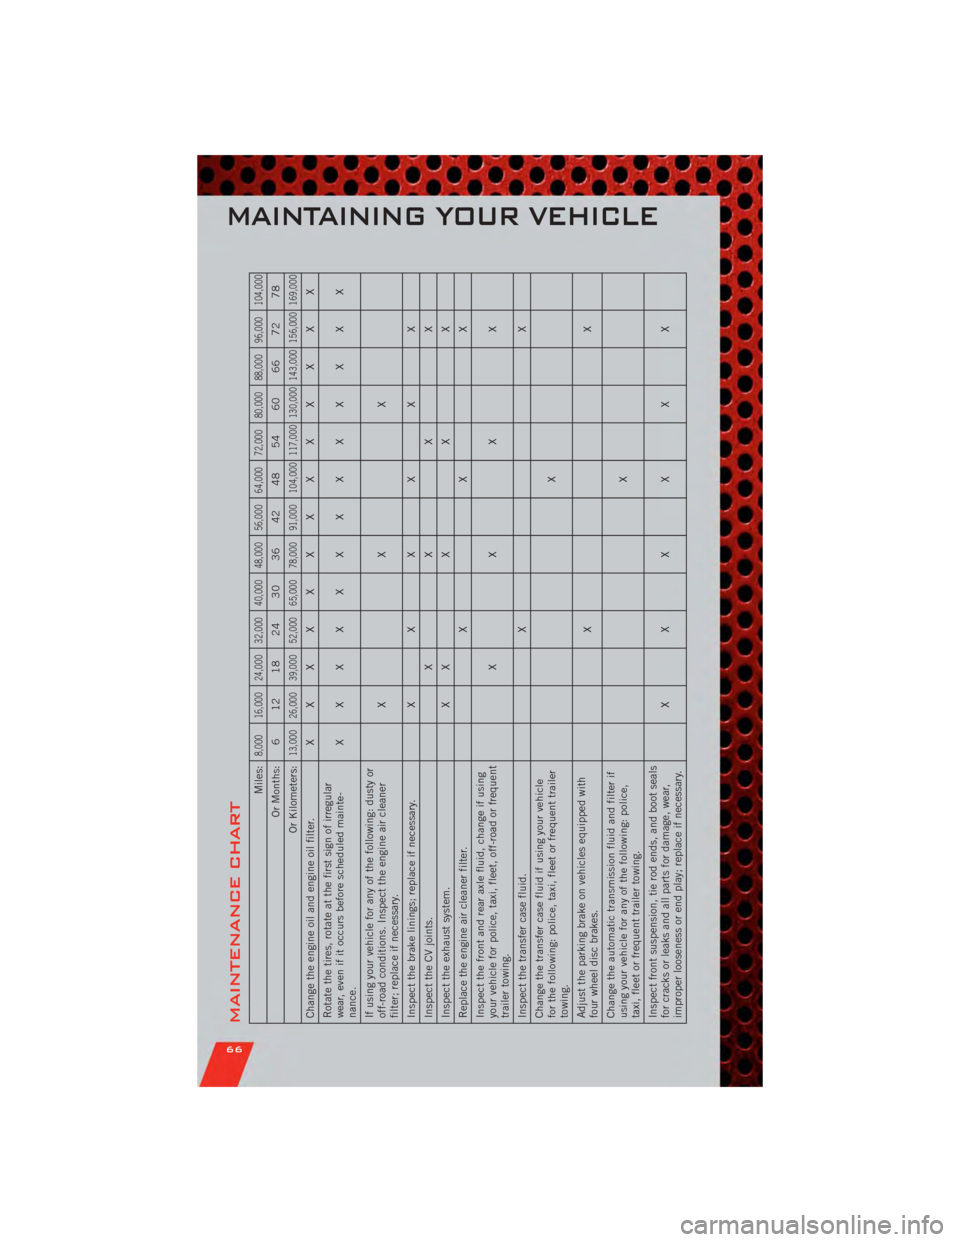 DODGE NITRO 2011 1.G User Guide MAINTENANCE CHART
Miles:
8,000 16,000 24,000 32,000 40,000 48,000 56,000 64,000 72,000 80,000 88,000 96,000 104,000
Or Months: 6 12 18 24 30 36 42 48 54 60 66 72 78
Or Kilometers:
13,000 26,000 39,000